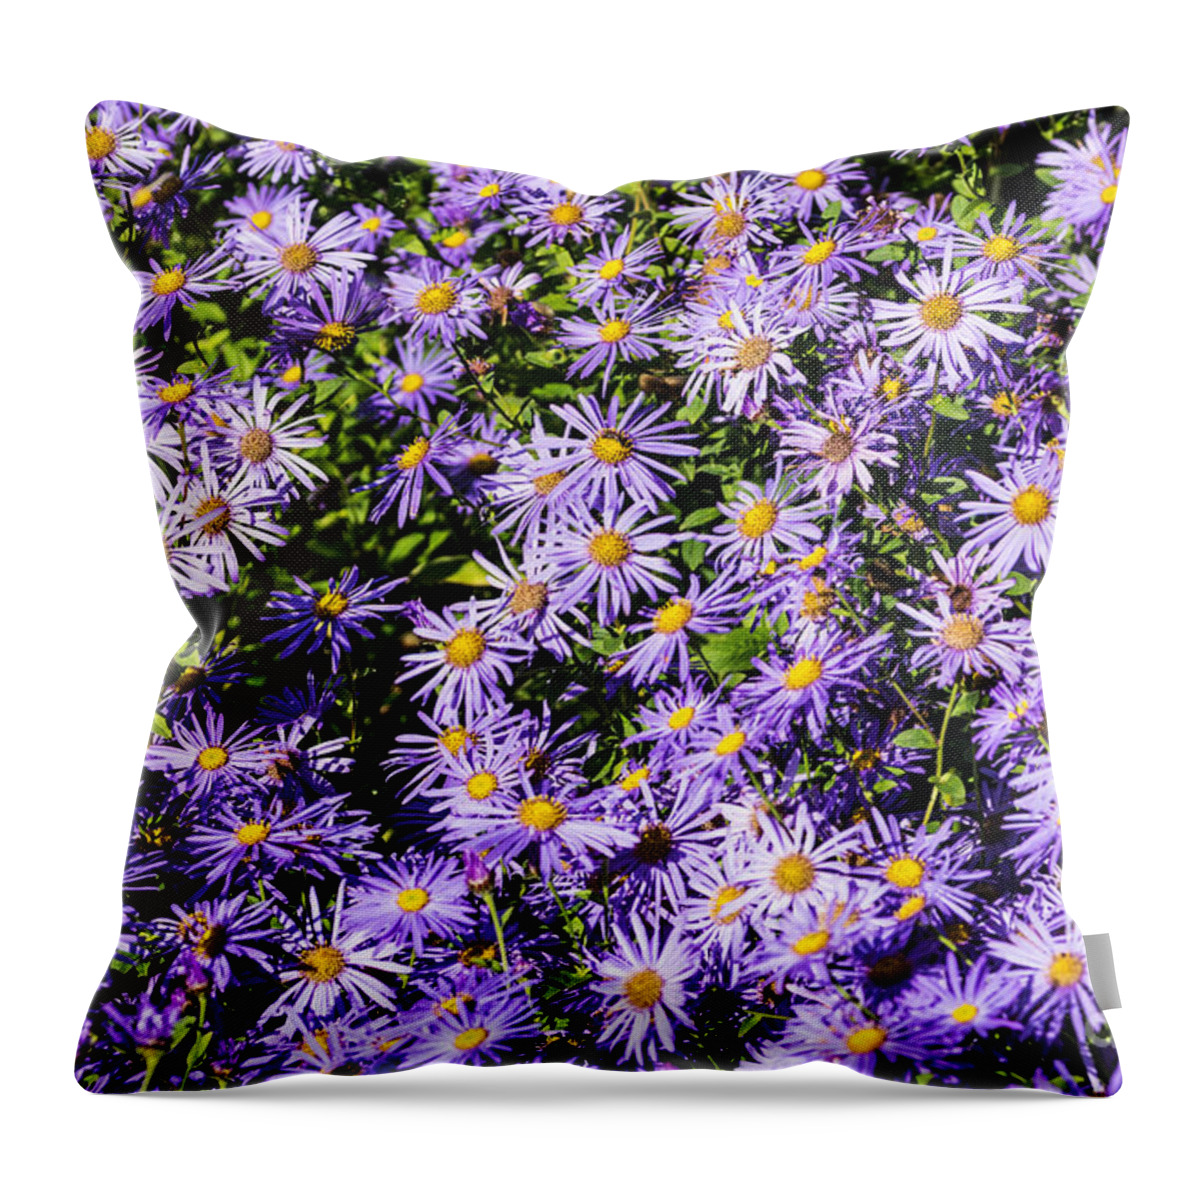 Aster Throw Pillow featuring the photograph Asters by Steve Purnell